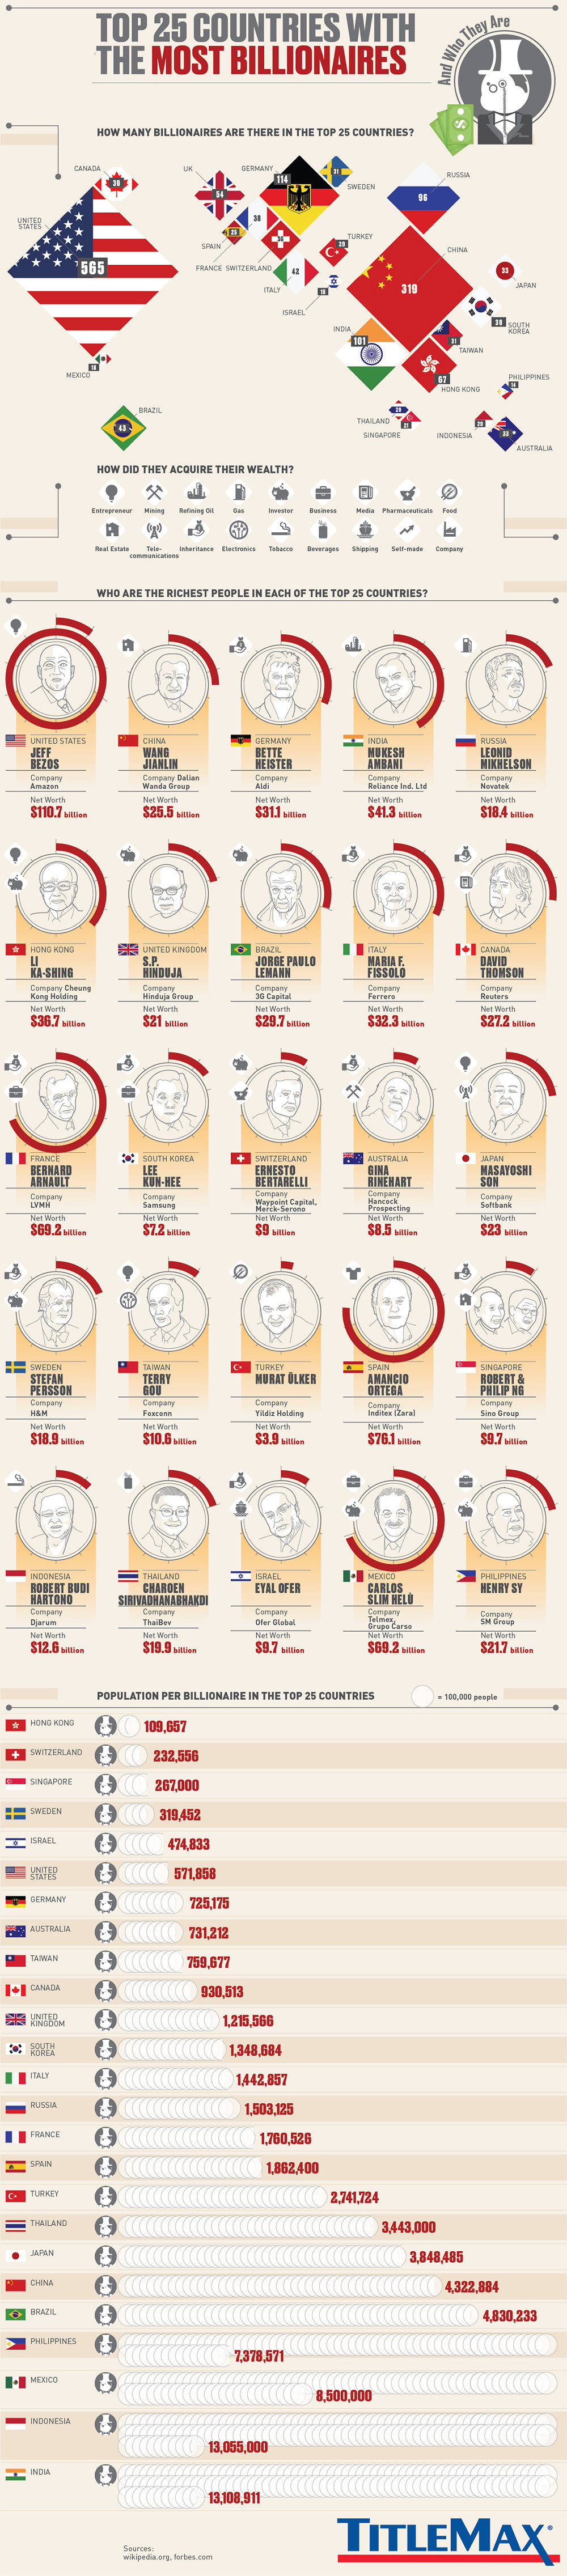 The 25 Countries With the Most Billionaires